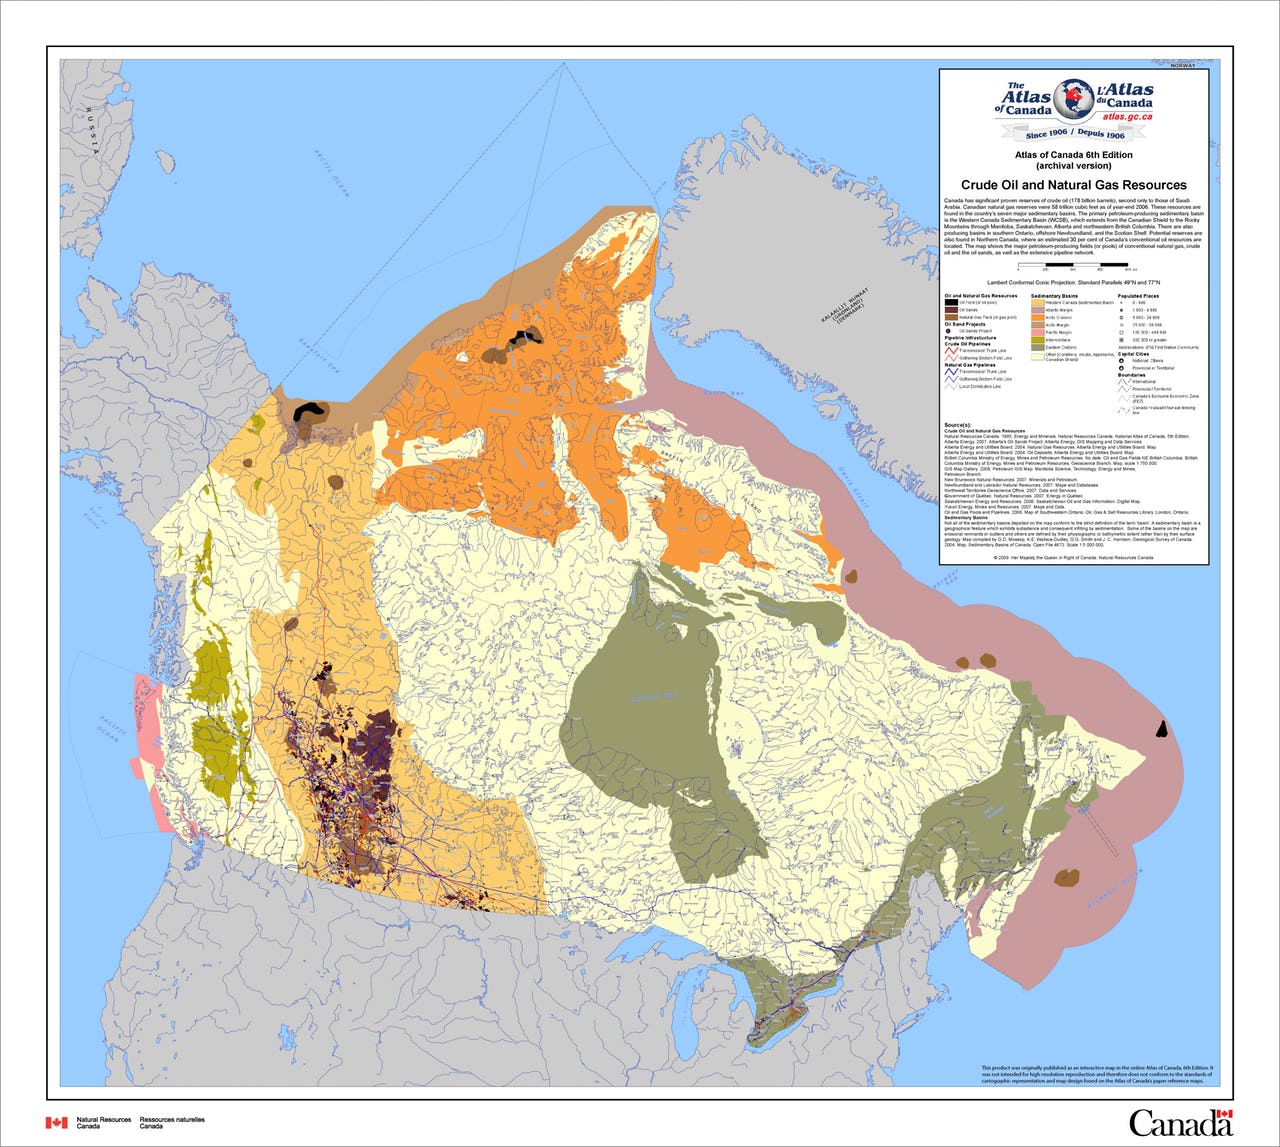 Canada Crude Oil Natural Gas Resources Map 